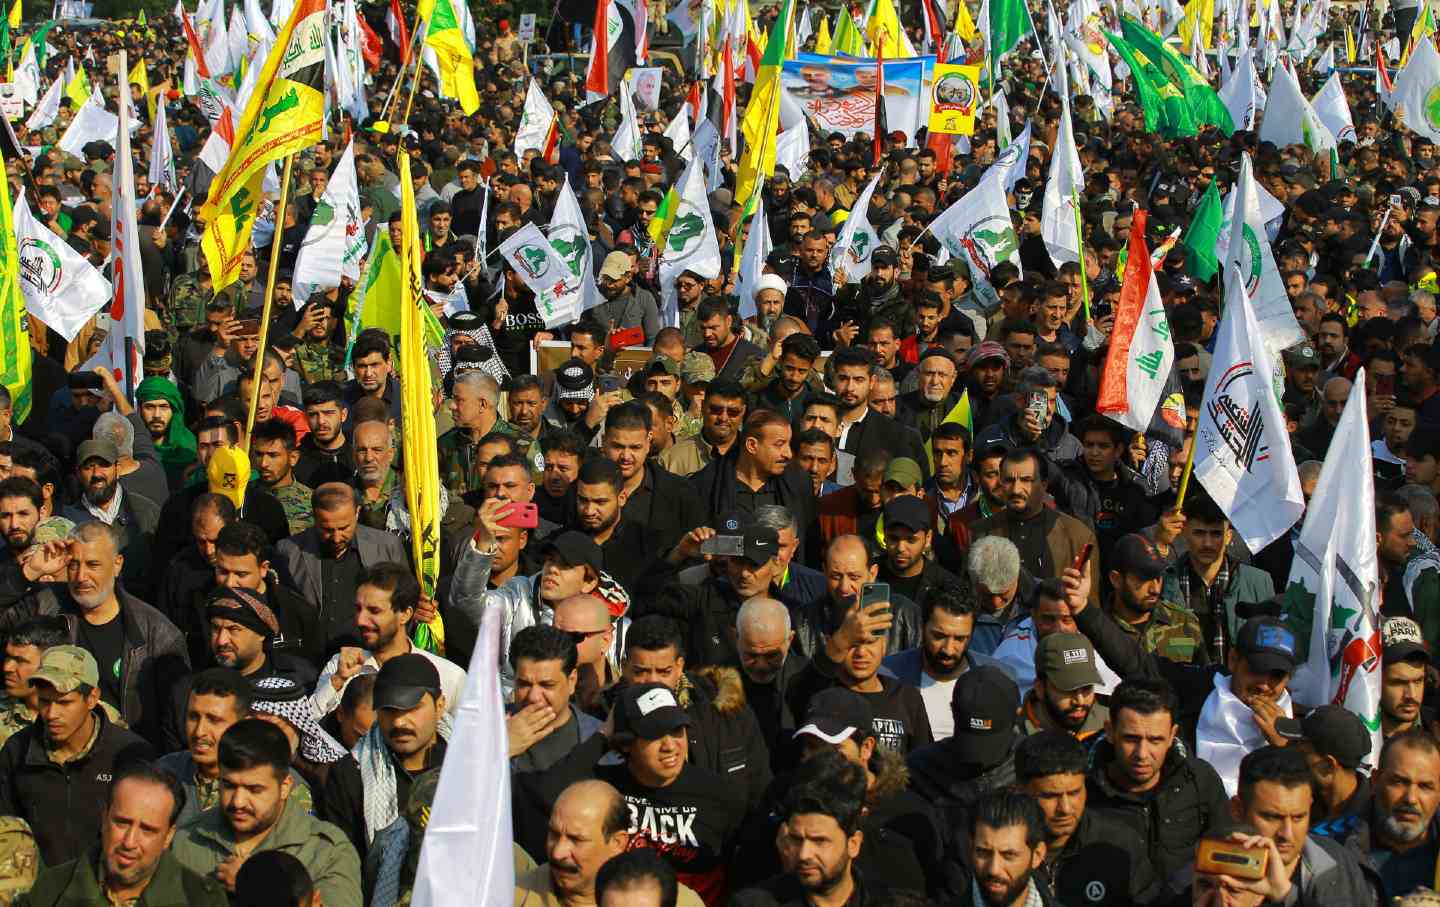 Mourners attend a funeral procession for Suleimani and al-Muhandis.